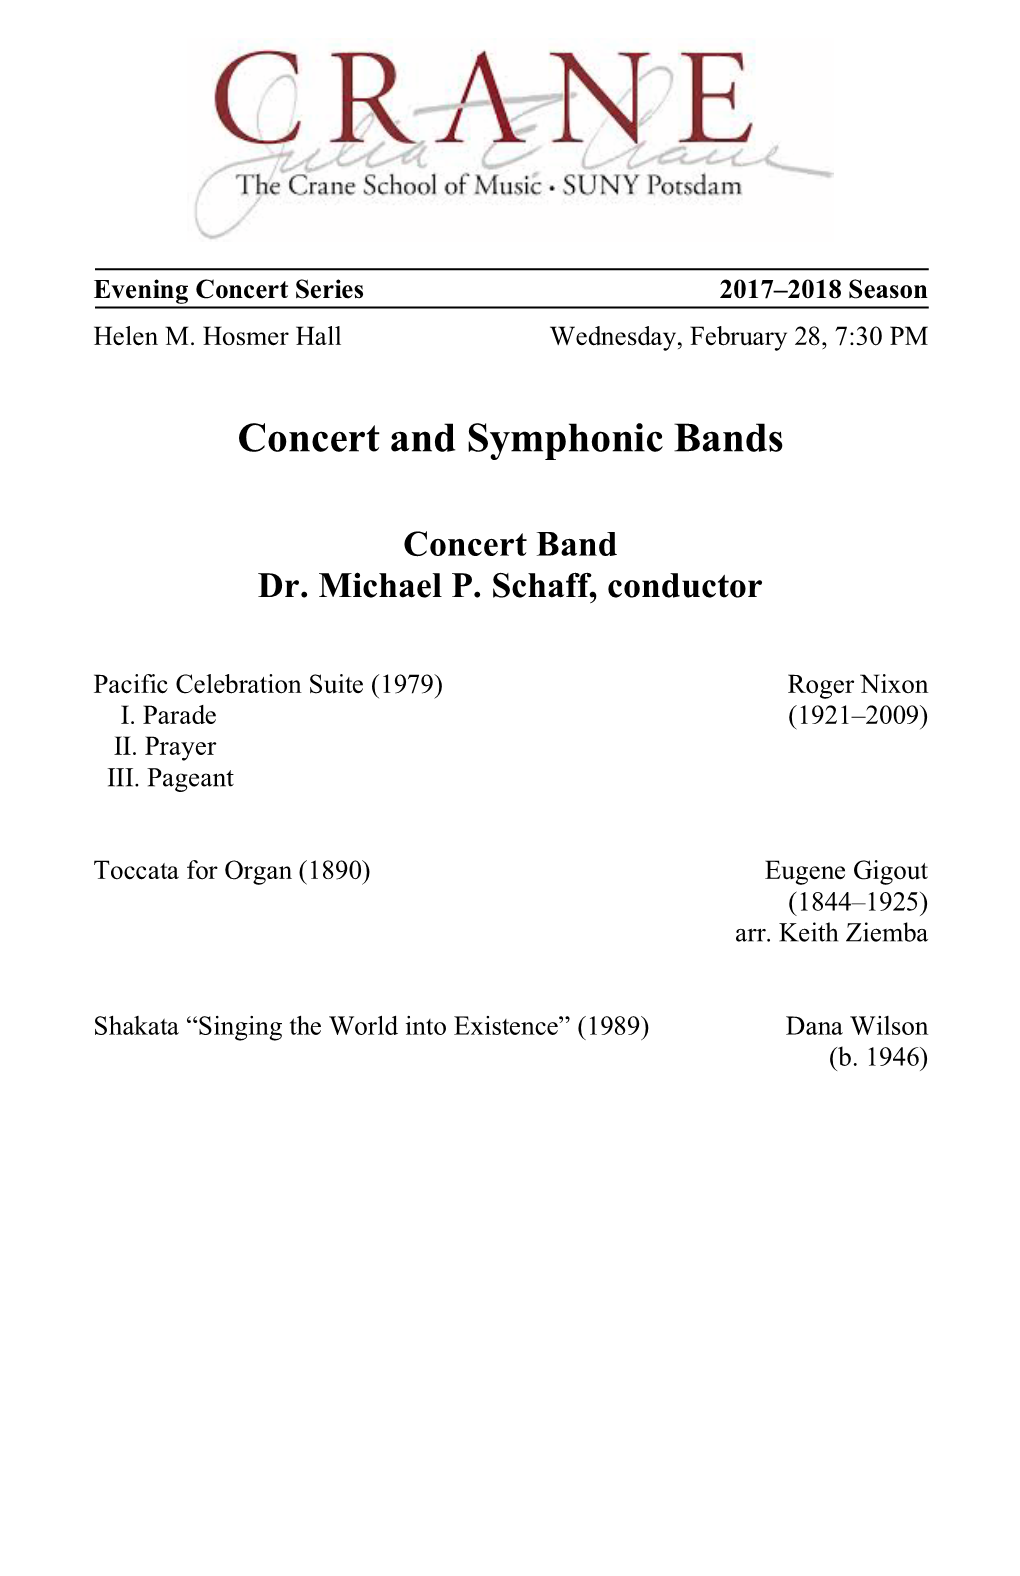 Concert and Symphonic Band 2 28 18